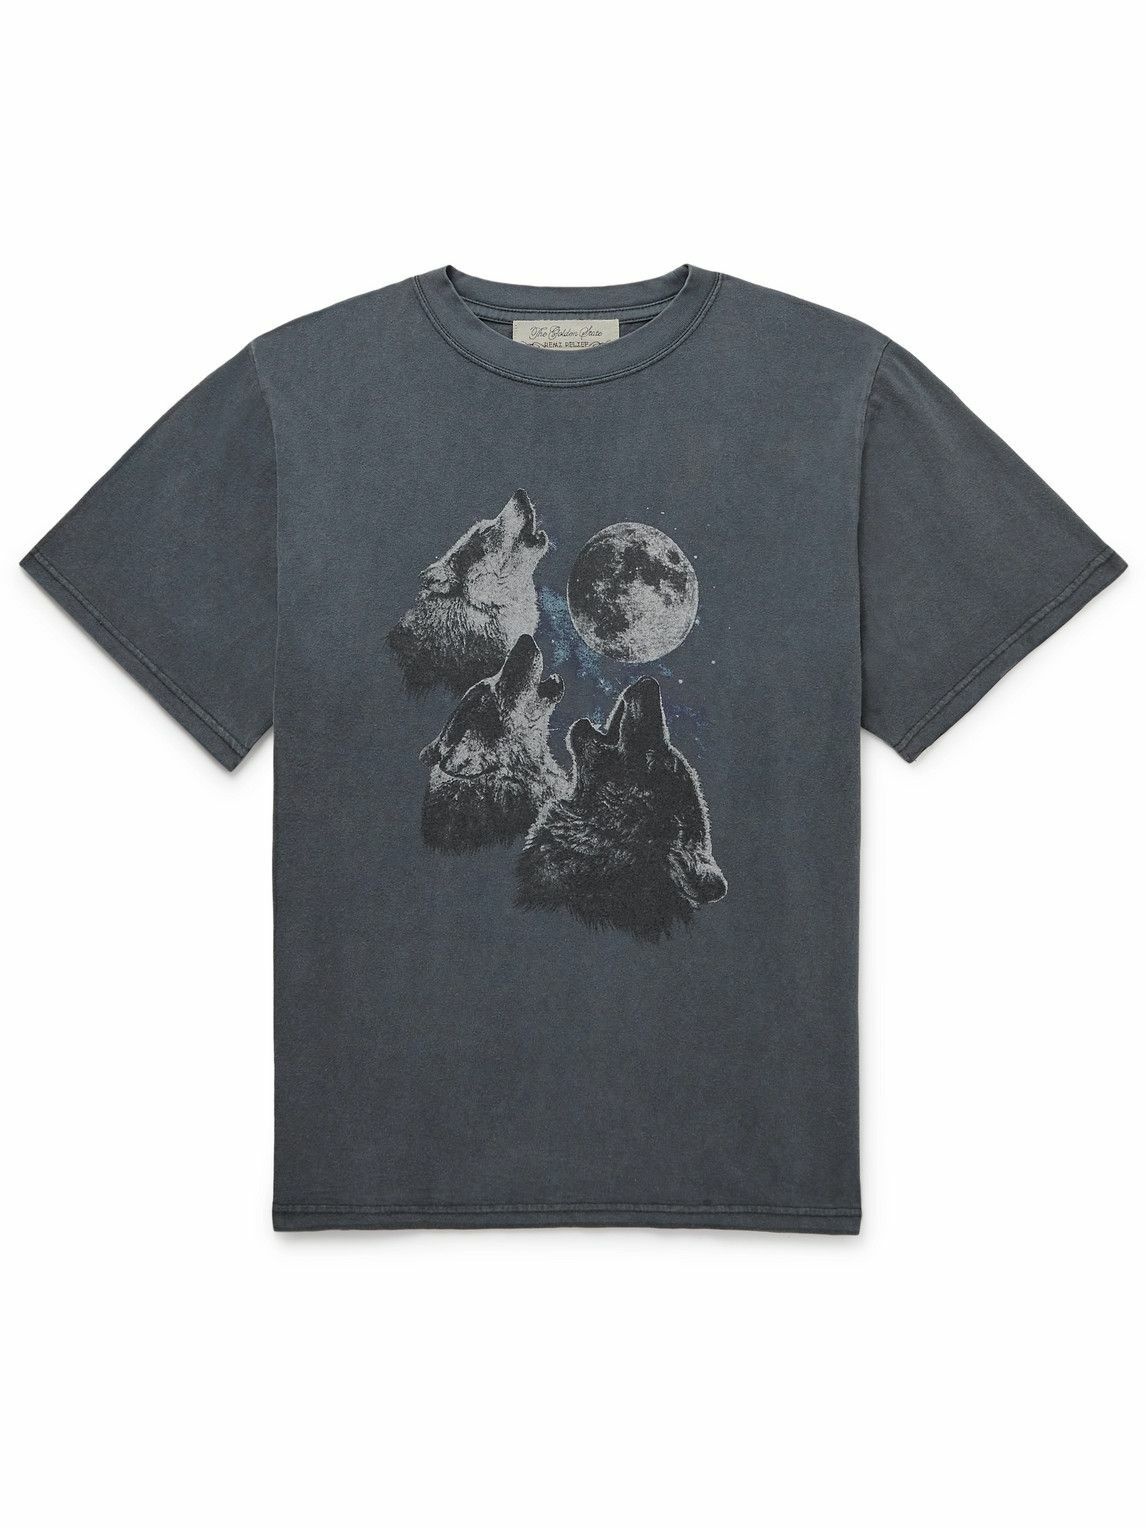 Remi Relief - Printed Cotton-Jersey T-Shirt - Gray Remi Relief